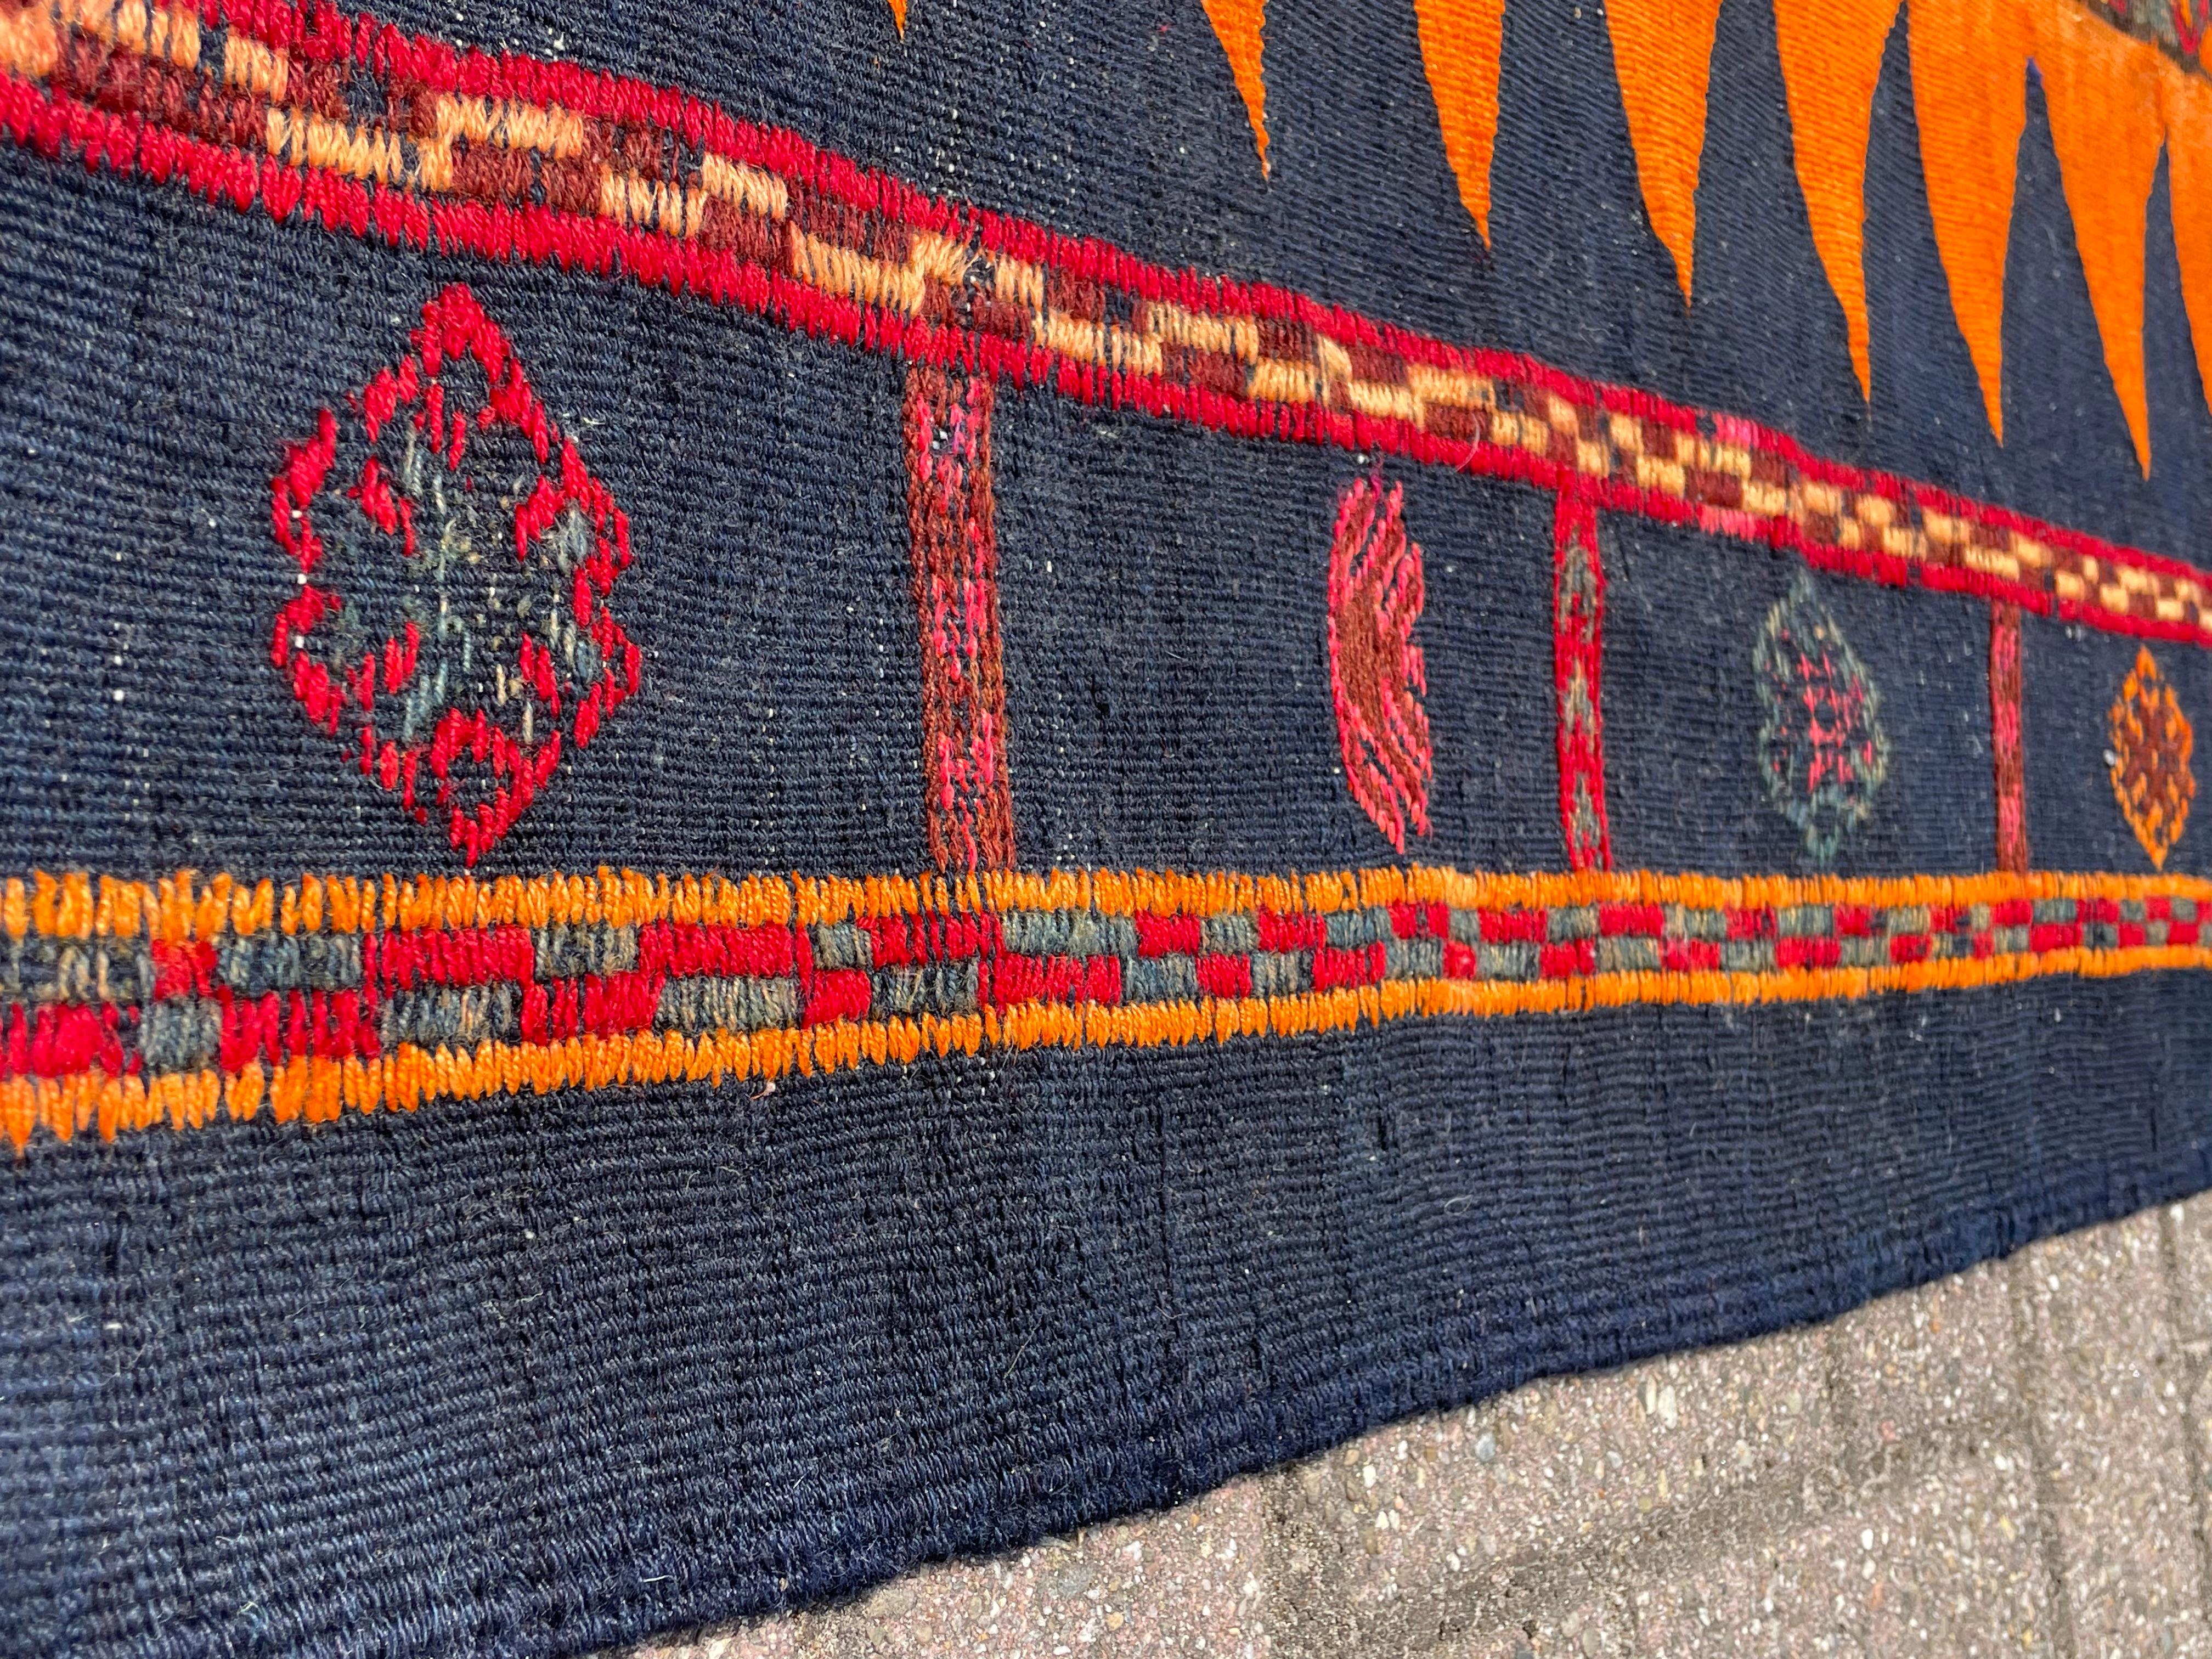 Dyed Stunning & Large Size Hand Knotted Kilim Rug Midcentury Design w. Vibrant Colors For Sale